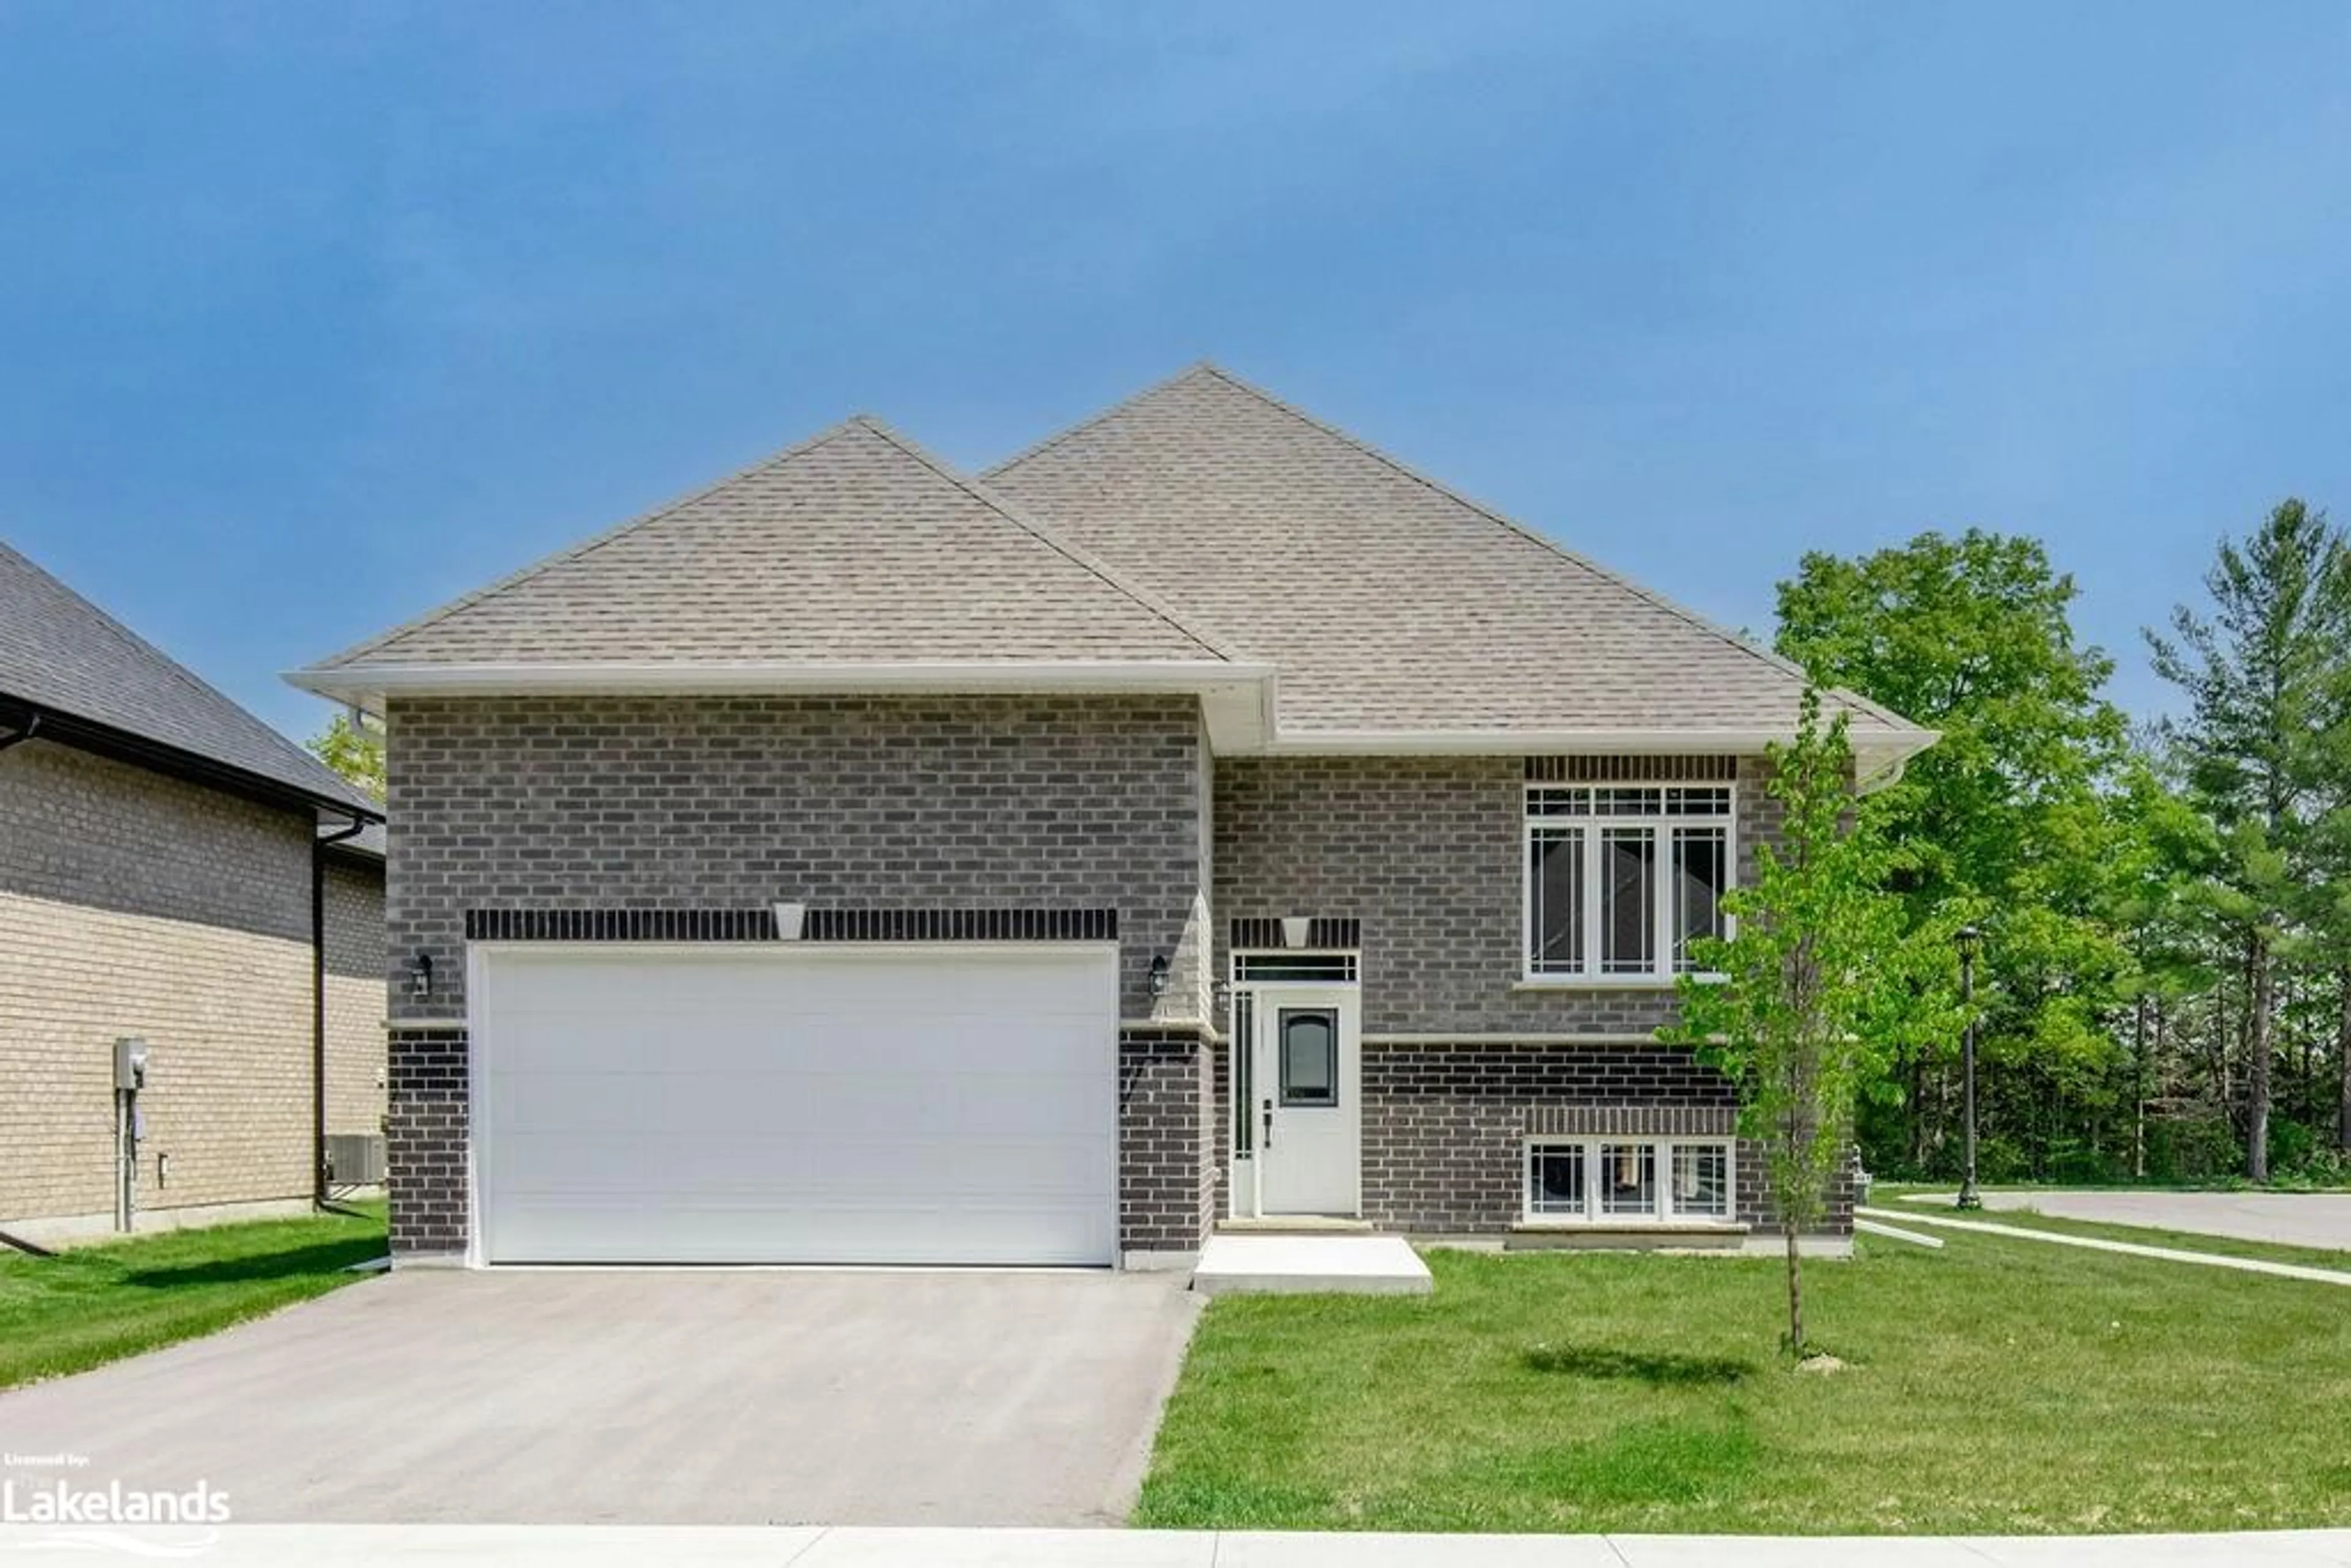 Home with brick exterior material for 51 Natures Trail, Wasaga Beach Ontario L9Z 0H4